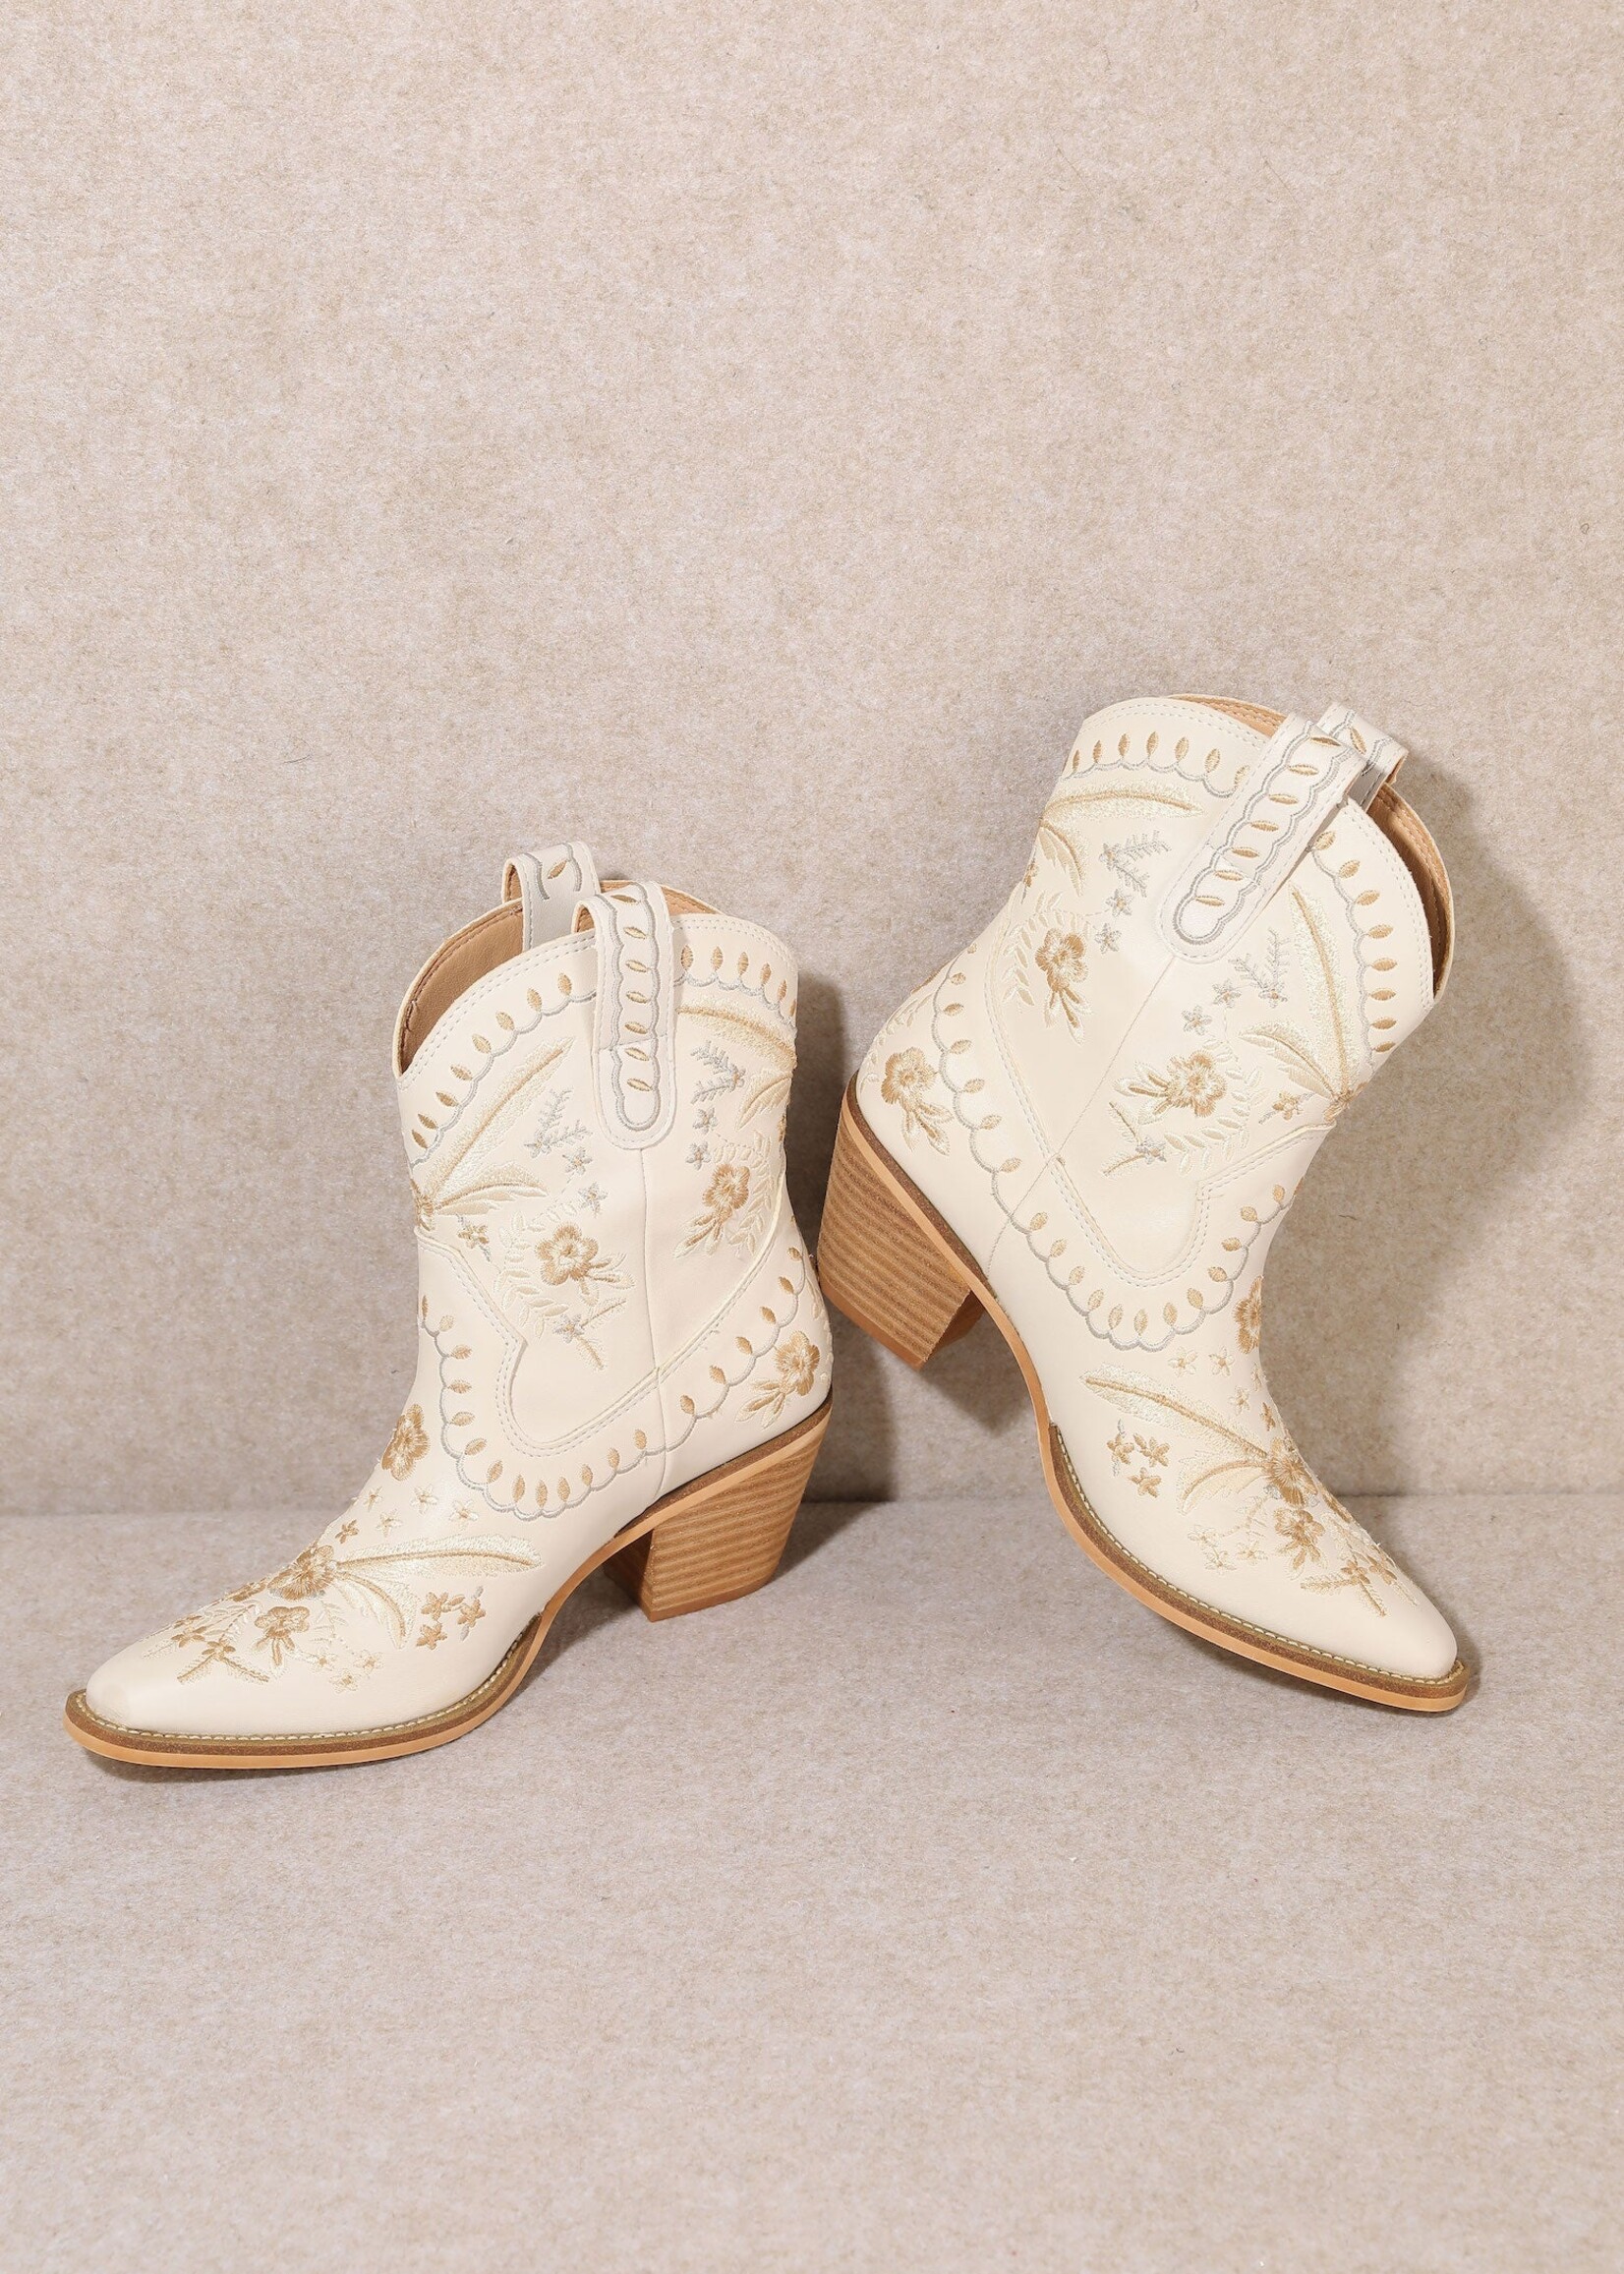 Corral Short White Cowgirl Boots